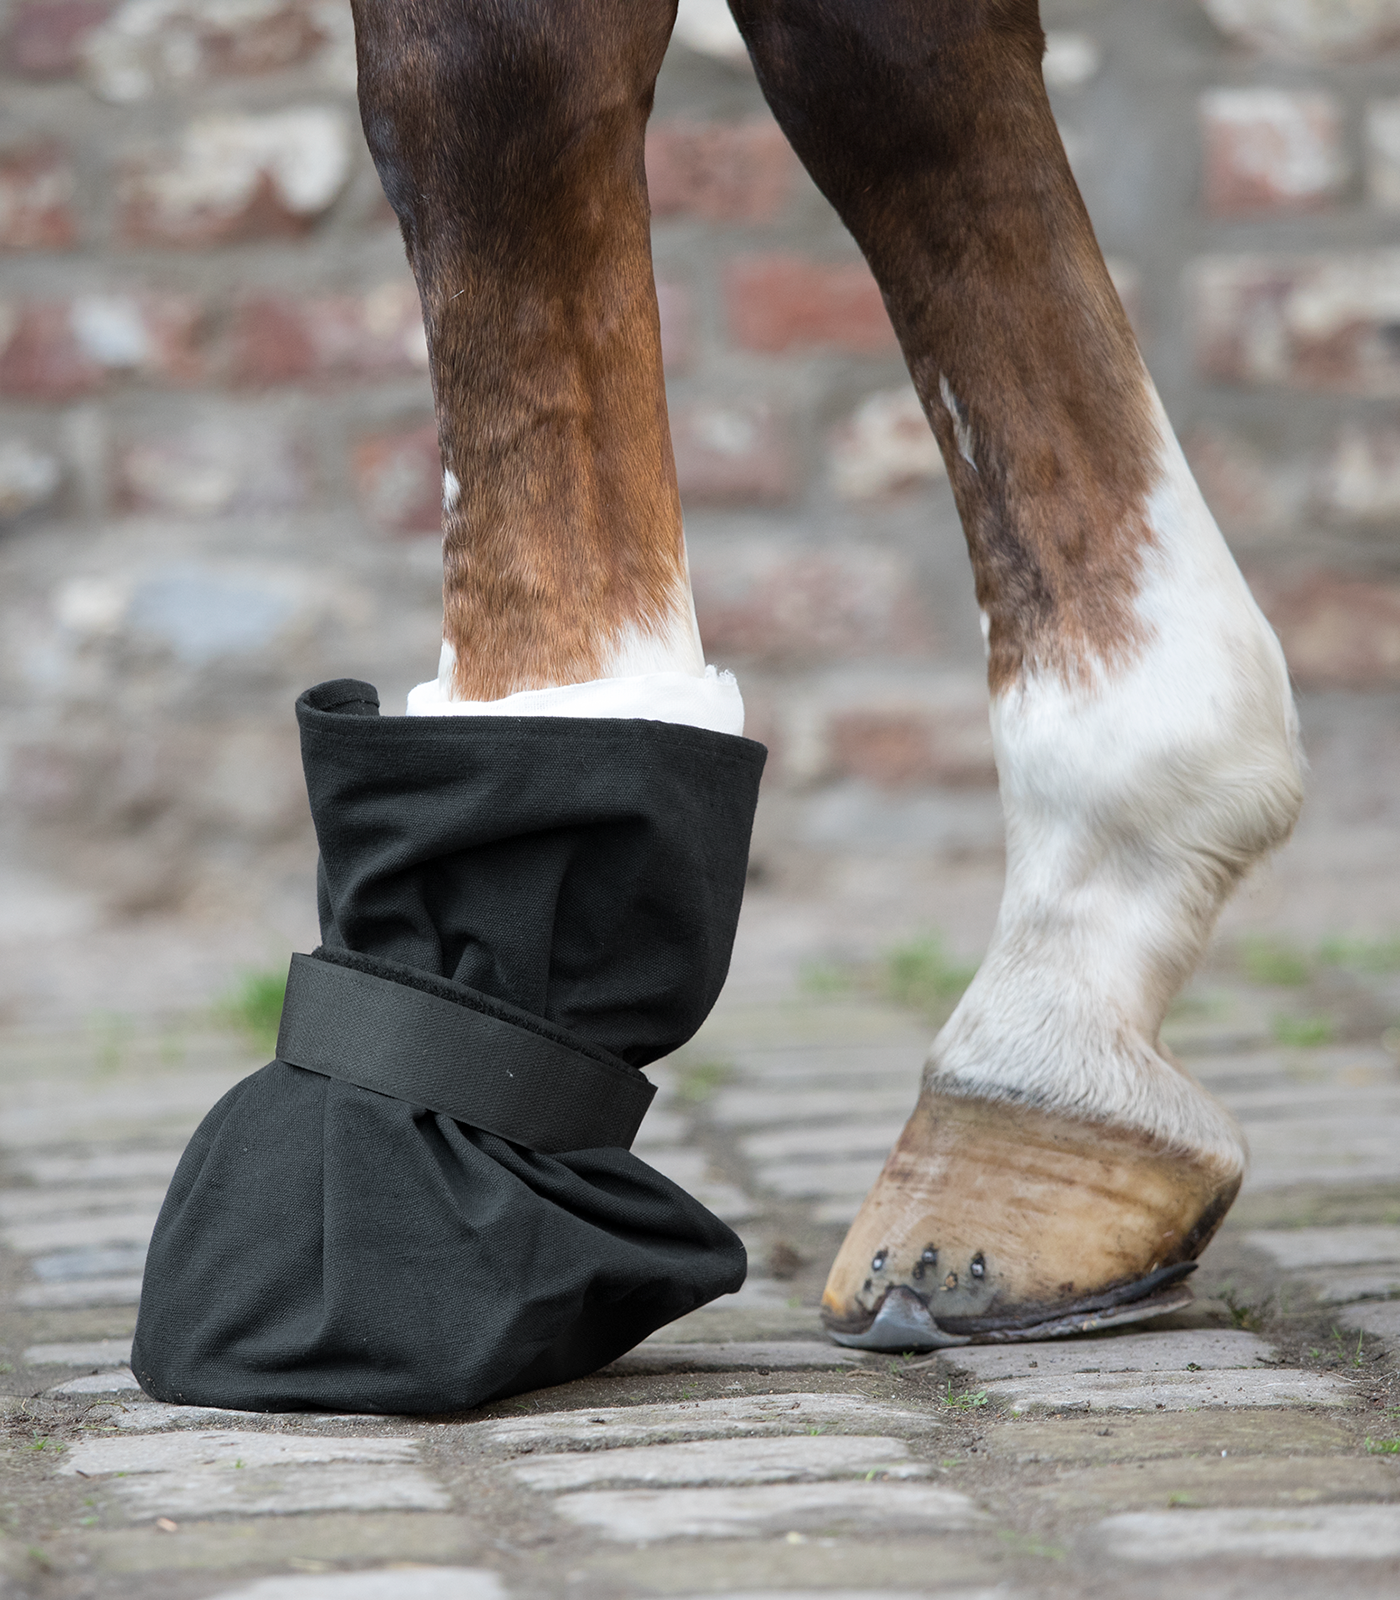 Protection for hoof dressings